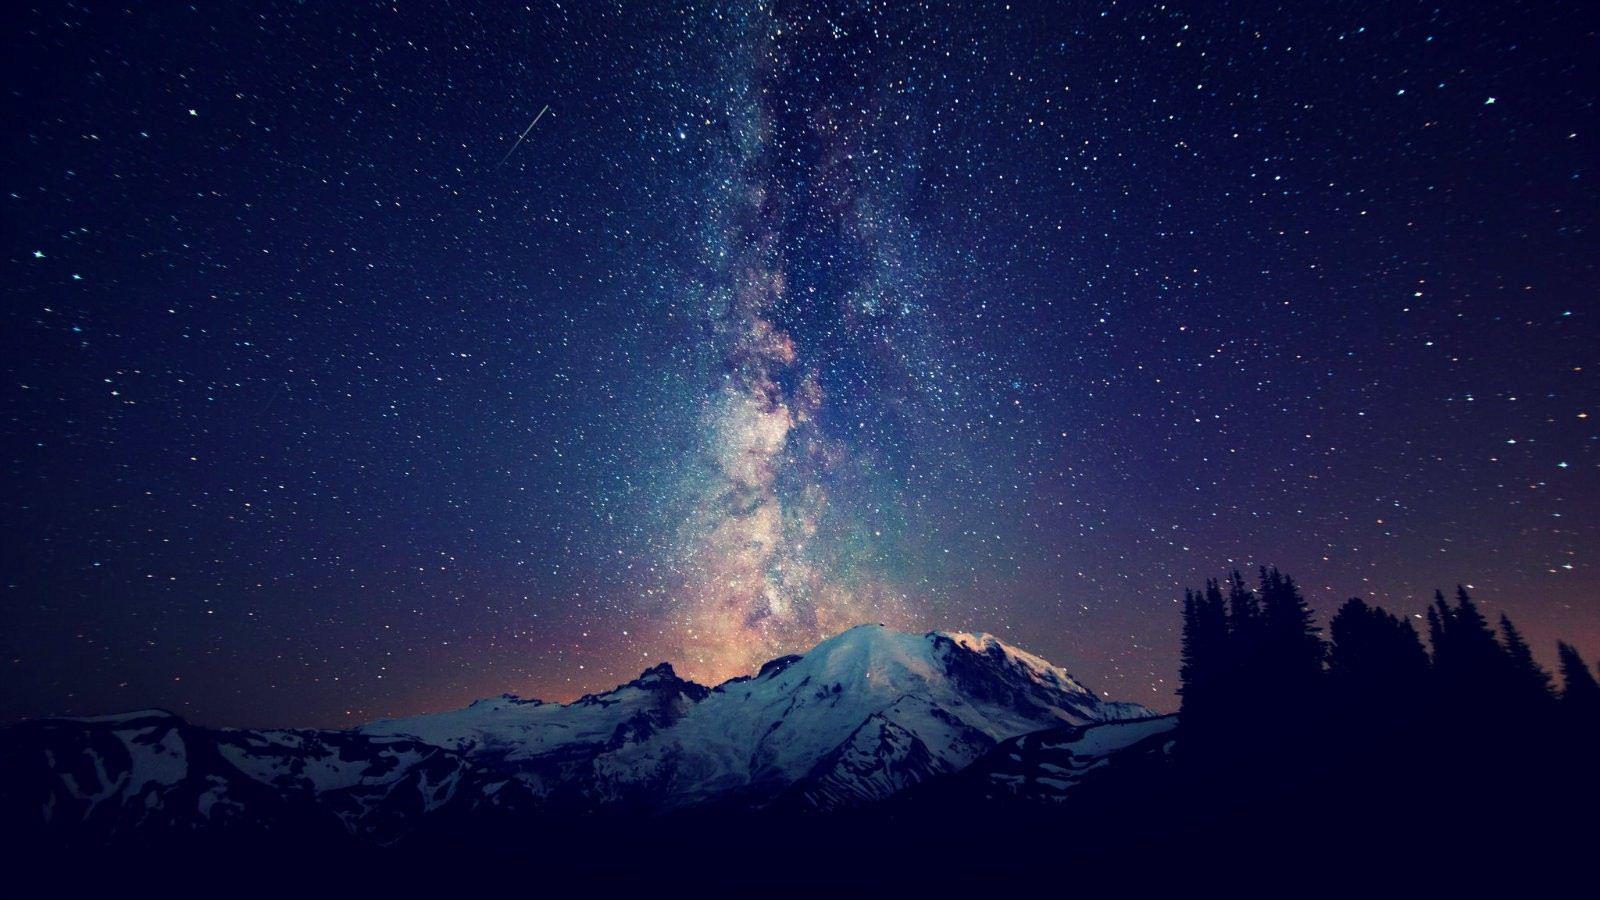 Milky Way Galaxy Over Mountains